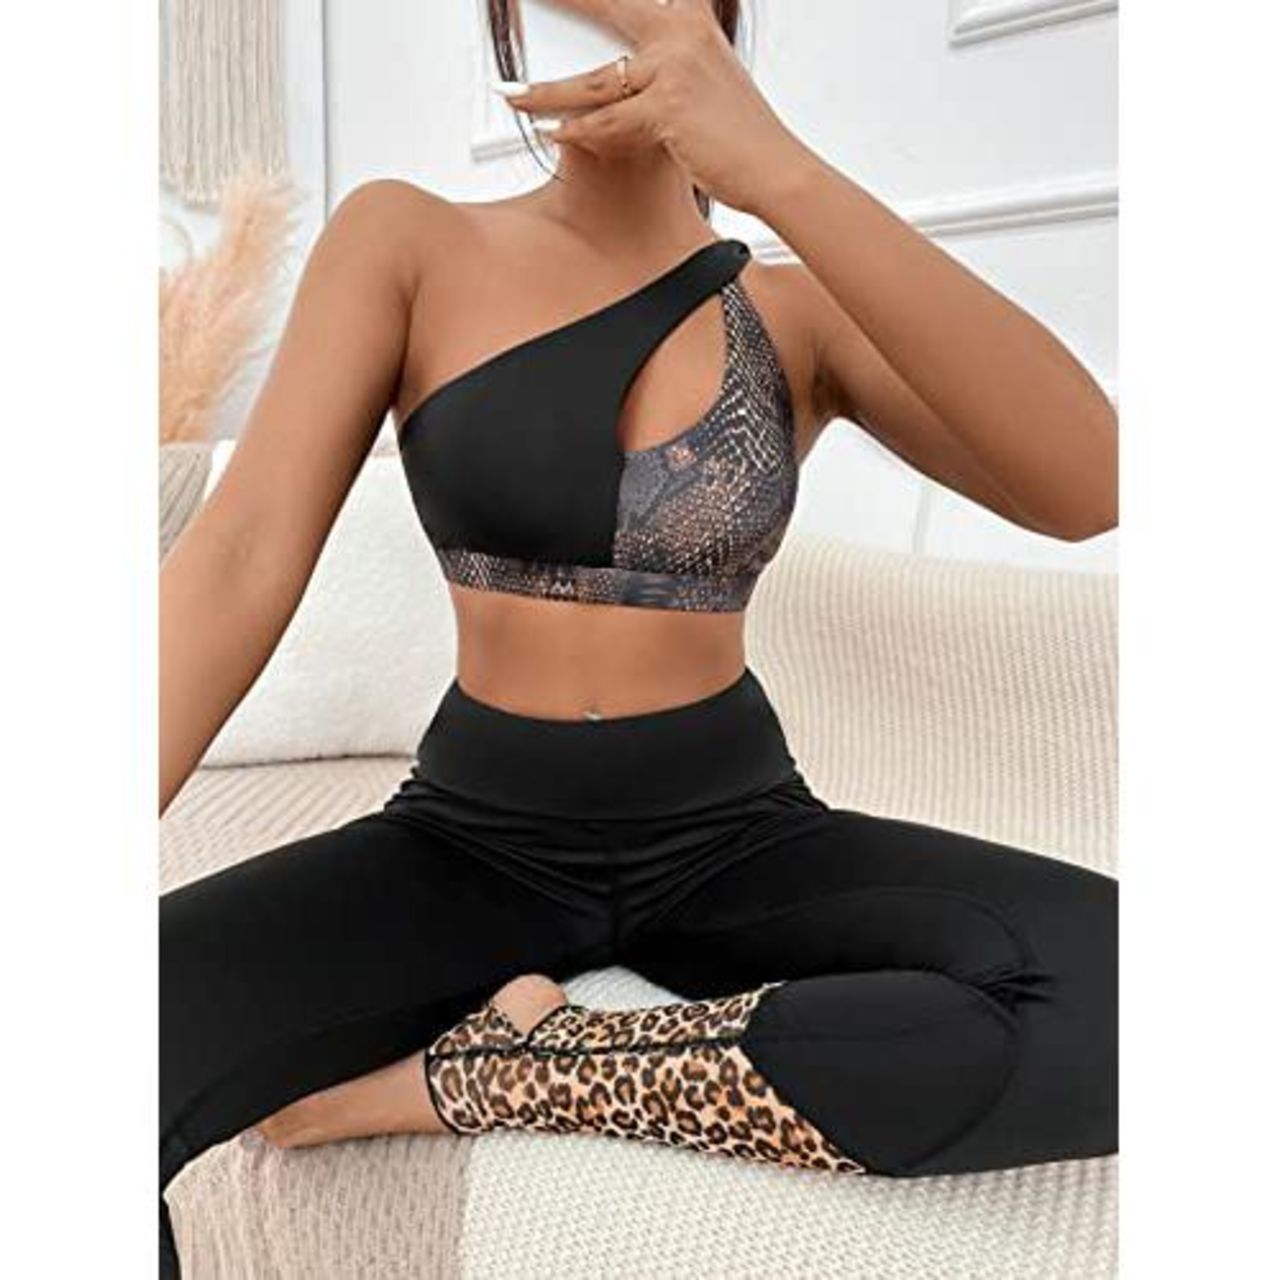 Aoxjox Yoga Pants for Women Workout High Waisted Gym Sport Adapt